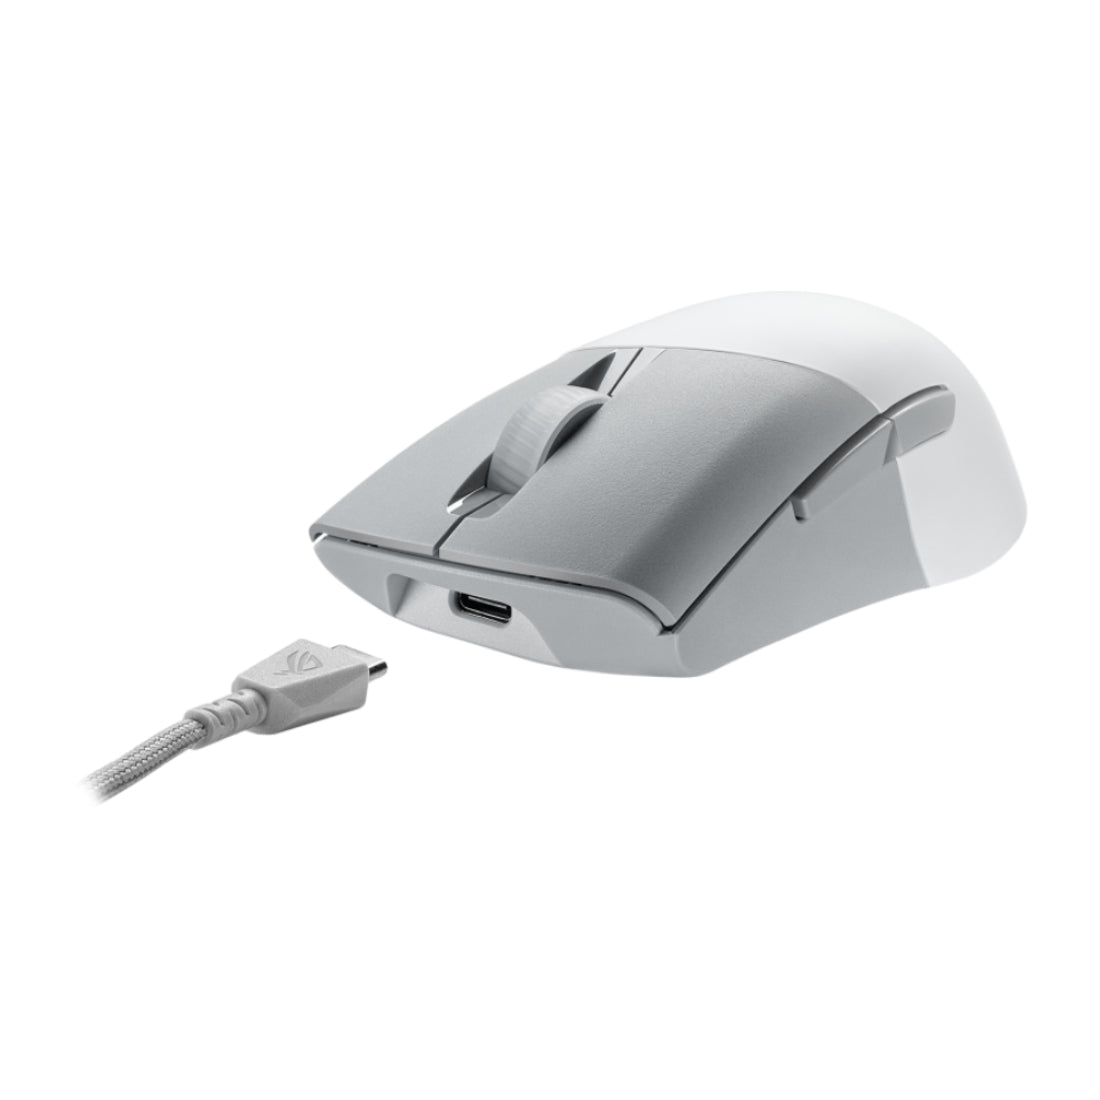 Asus ROG Keris AimPoint Wireless Gaming Mouse - White - فأرة - Store 974 | ستور ٩٧٤